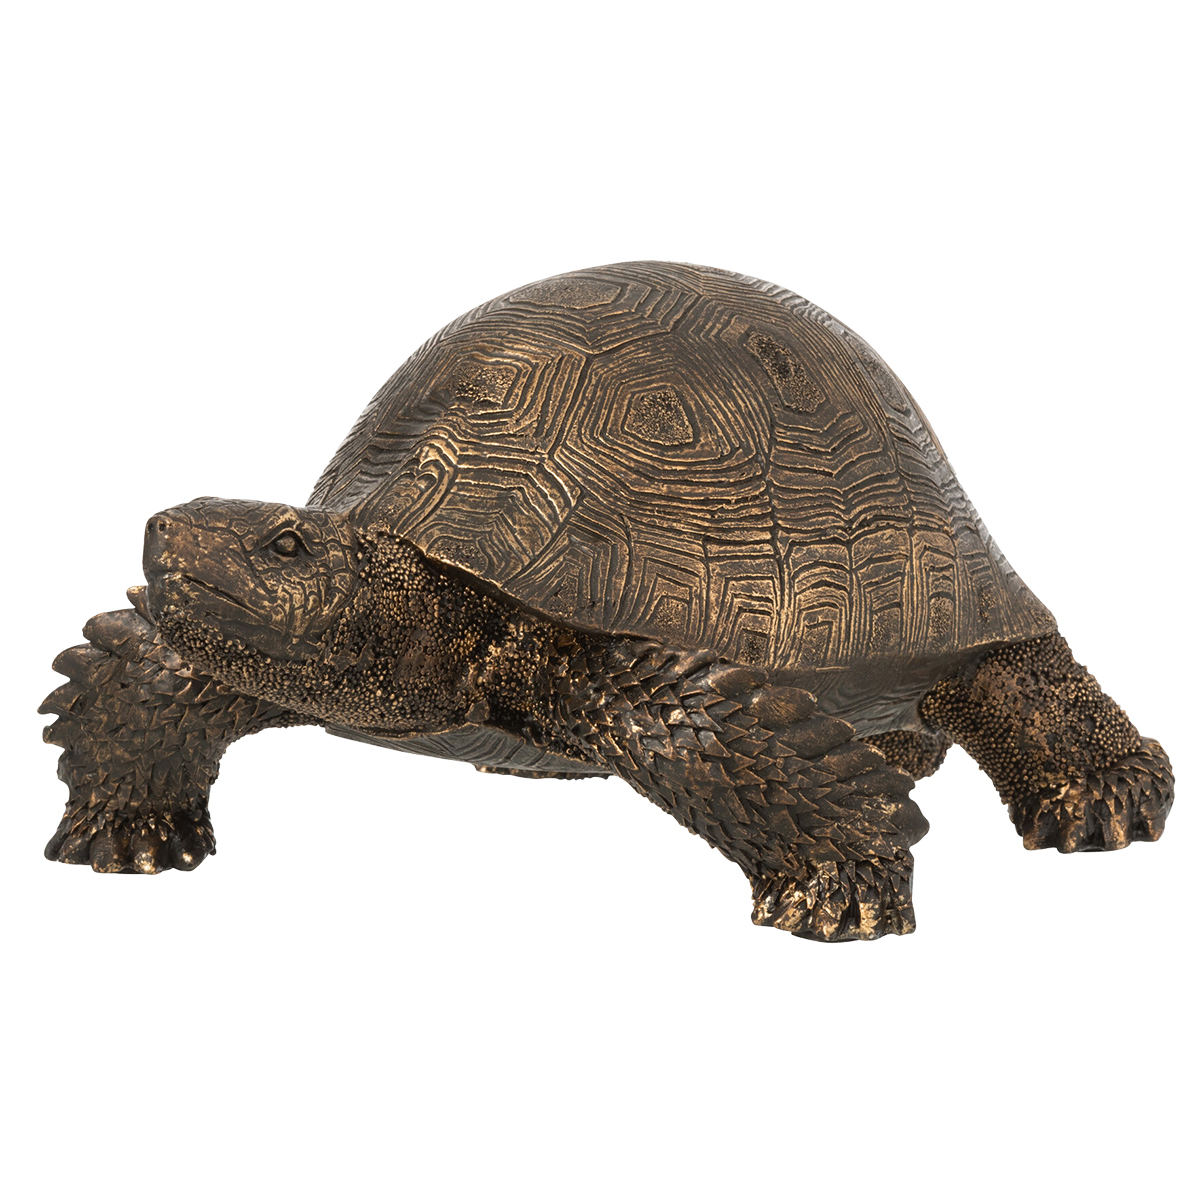 Figurine tortue or patin